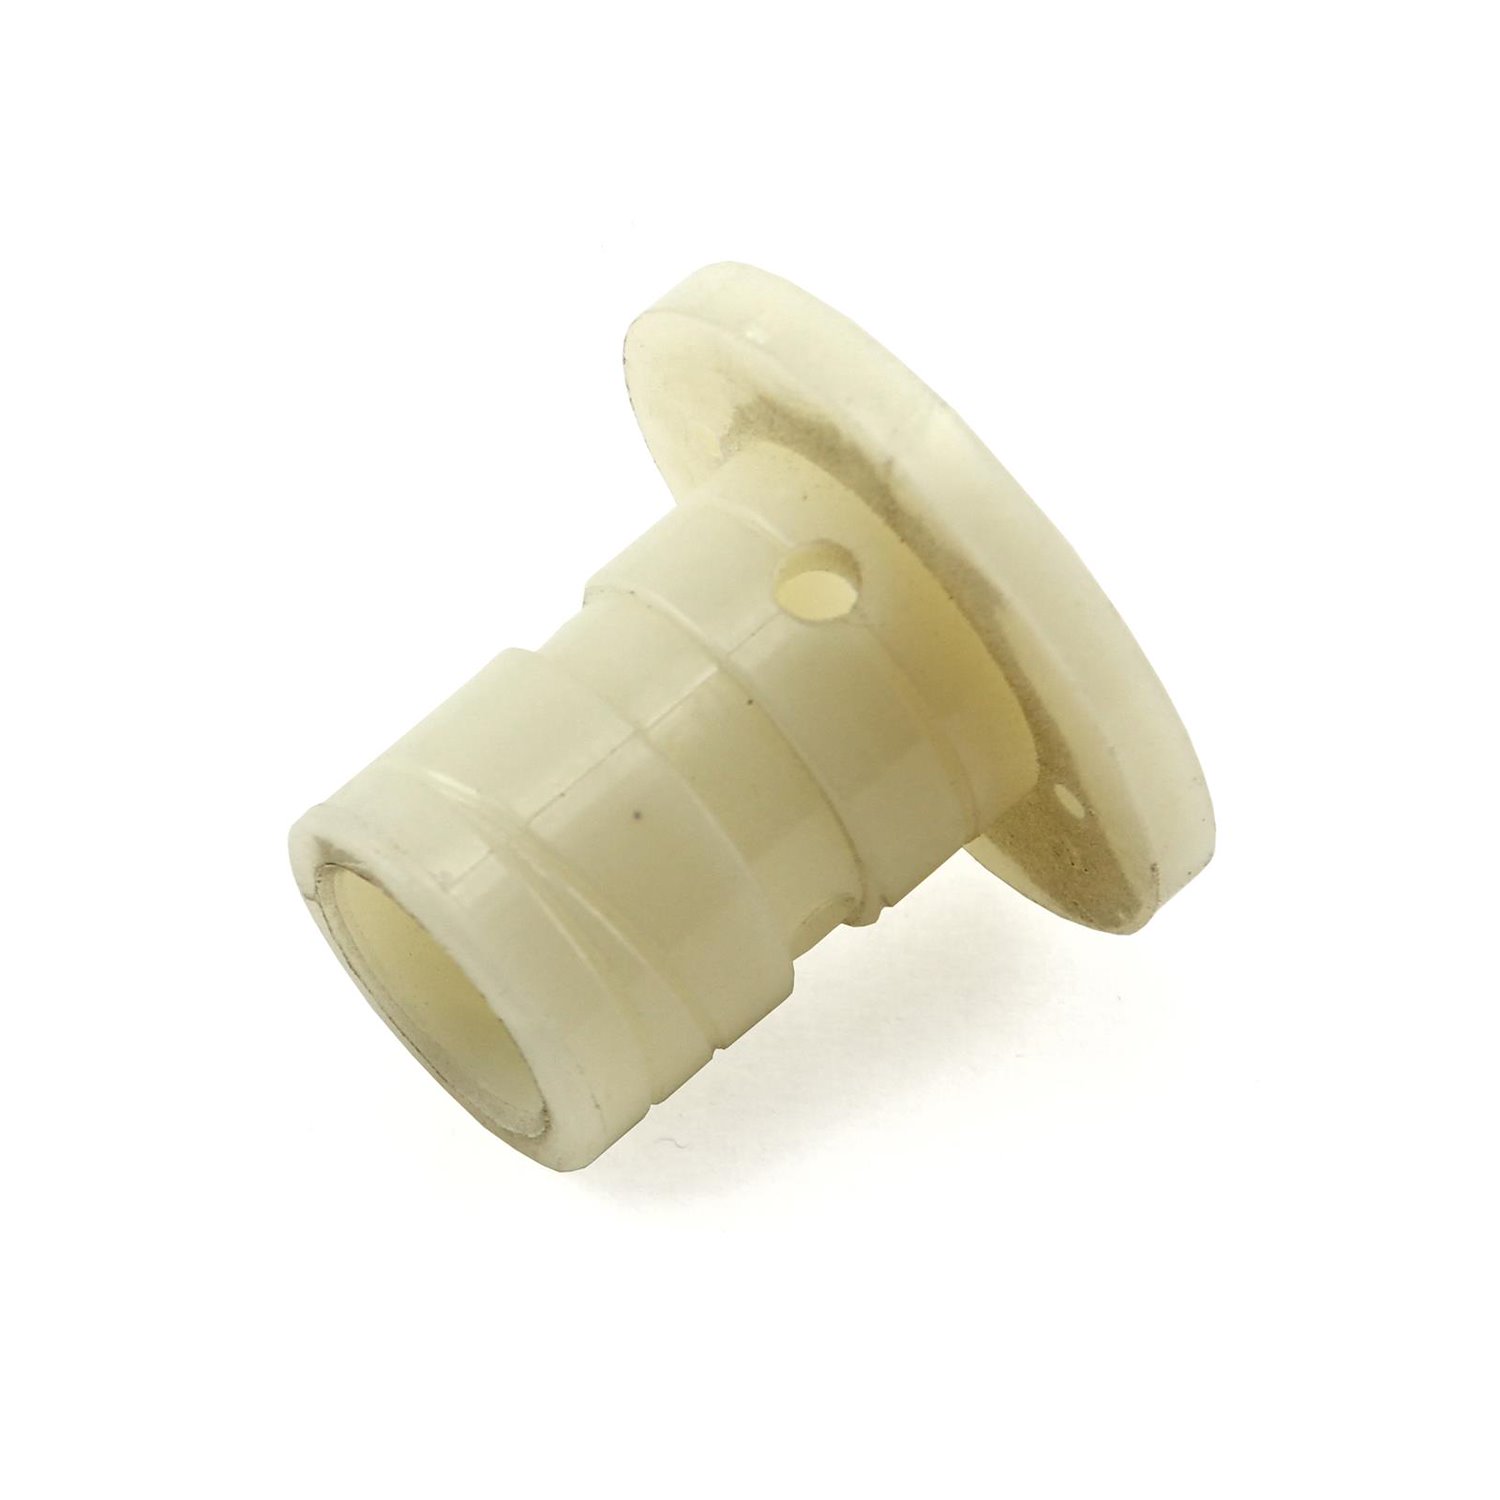 Replacement Bushing For Tds4003 A-Arms